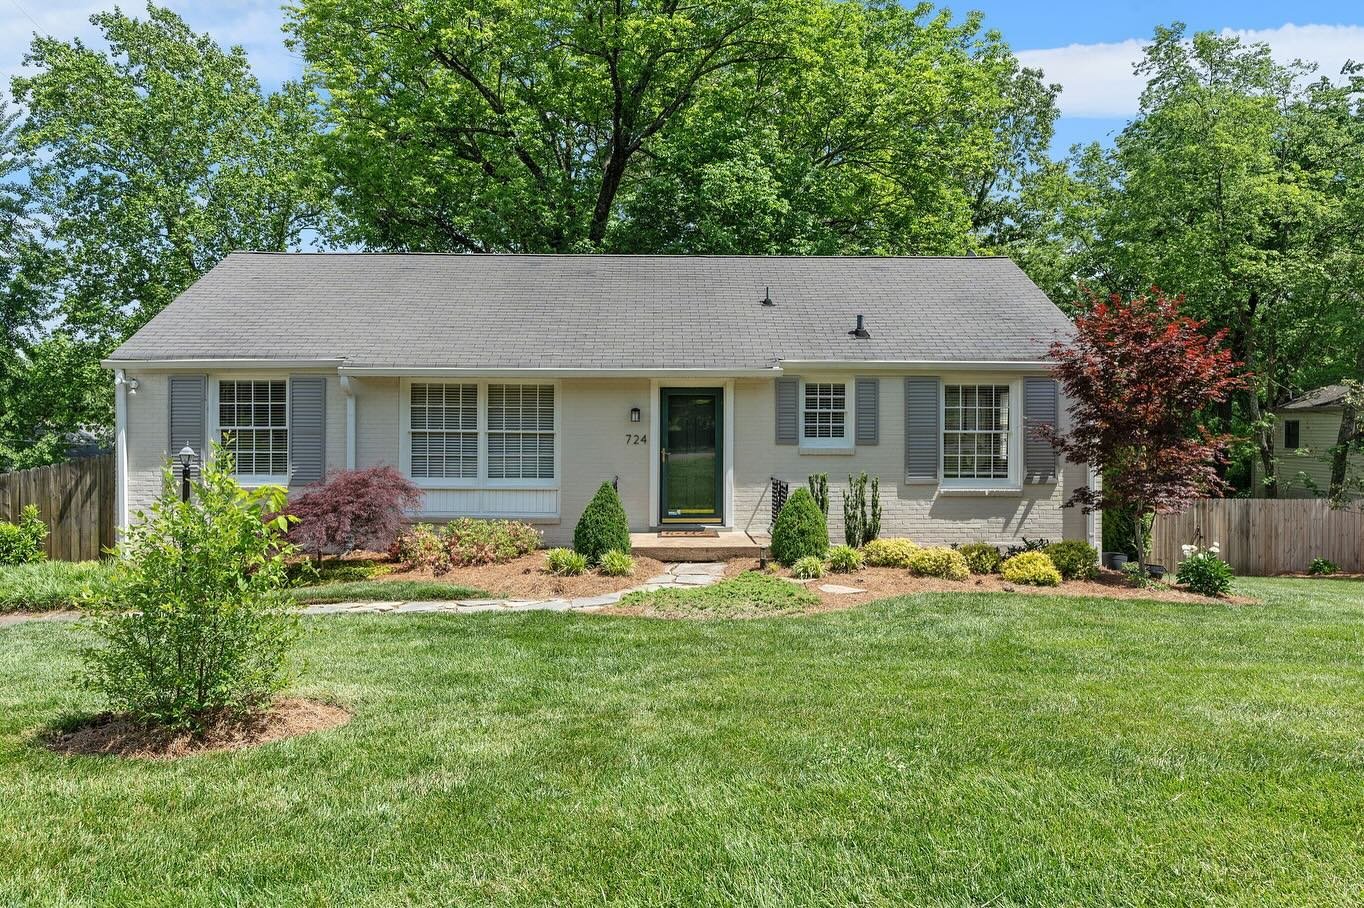 ✨Just listed and Open House Sunday 5/5 from 2-4p✨

724 Kendall Drive 
2 beds / 2 baths / 1219 sq feet
Asking price $599,000

Adorable and well-kept cottage in Brookside Courts - this sweet home has so much to offer in this highly sought after neighbo